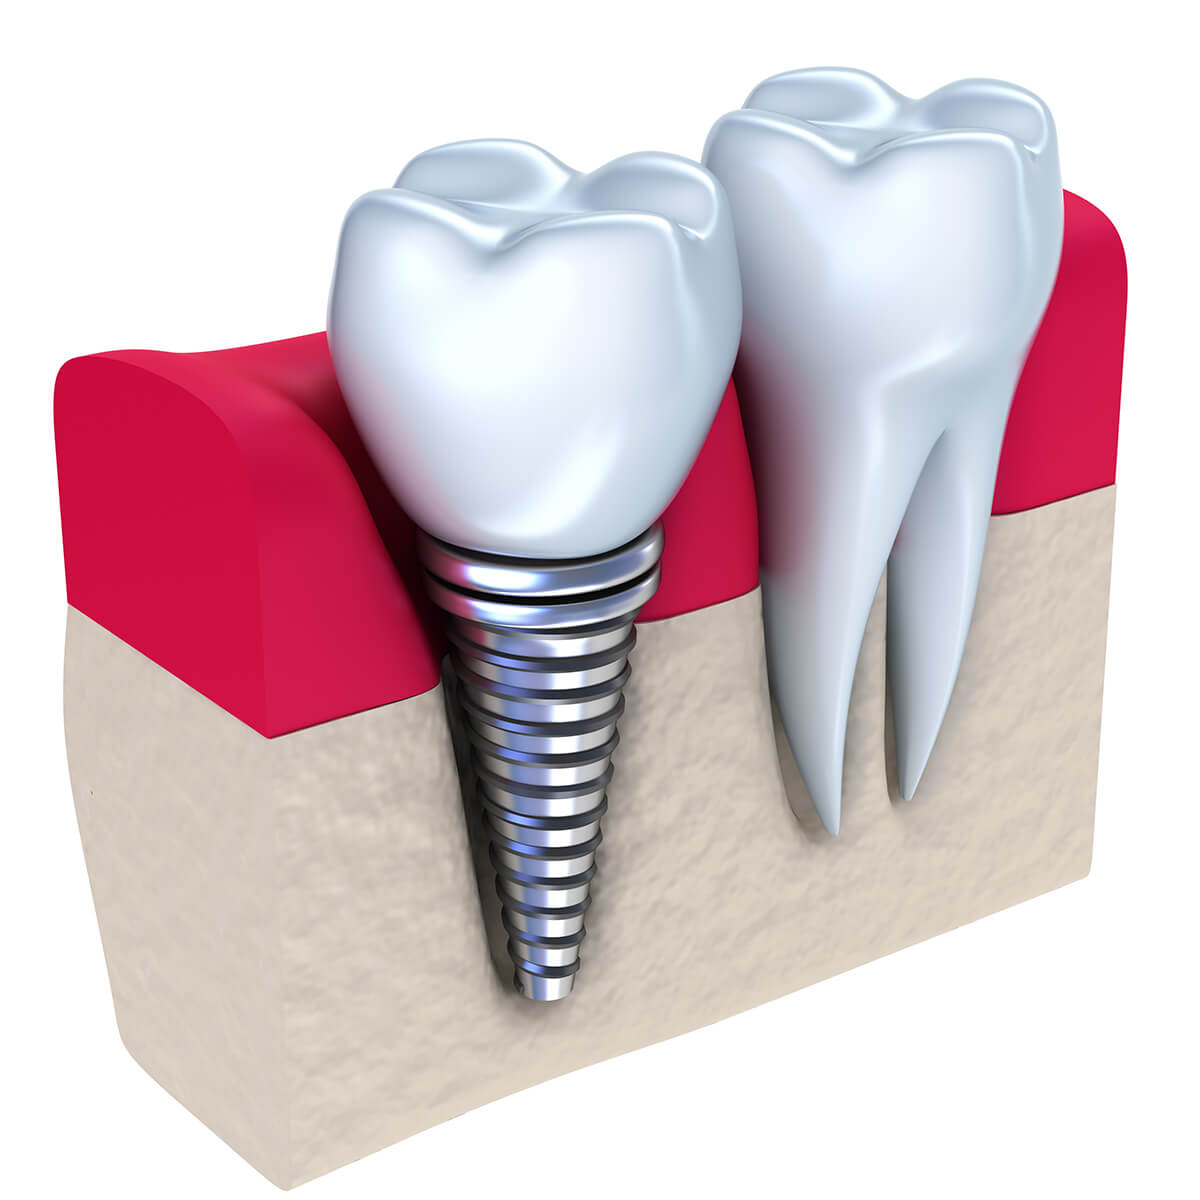 Missing teeth? Learn how dental implants can restore your smile